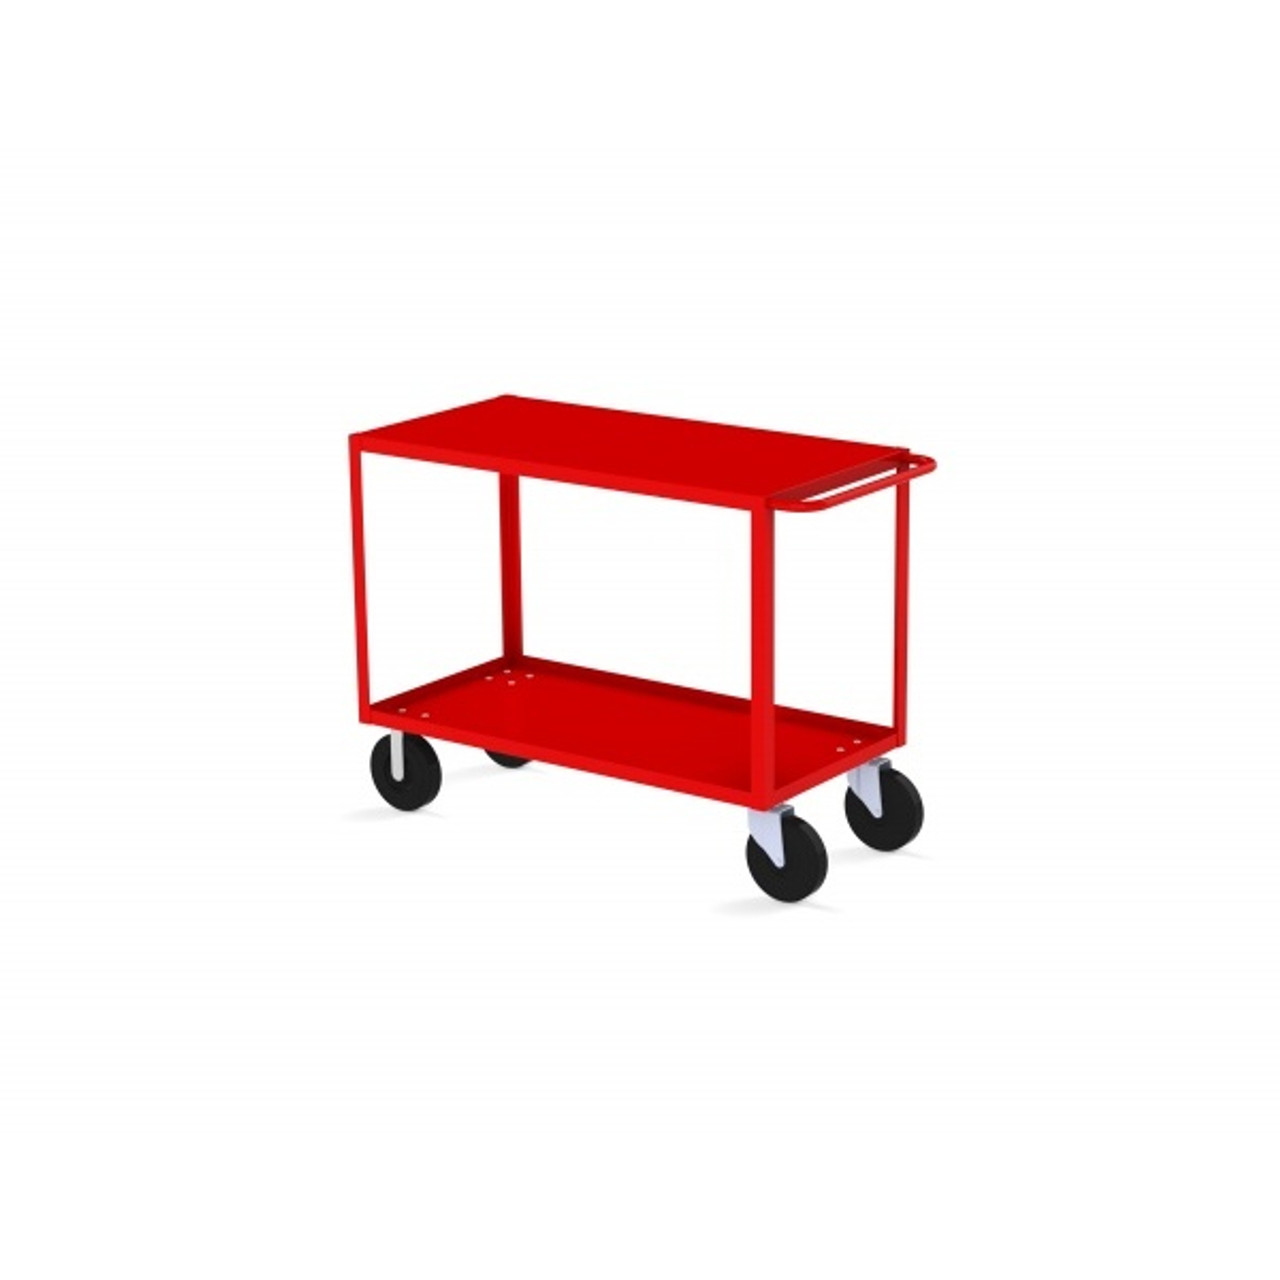 Valley Craft Two Shelf 30 x 60" Flush-Top Utility Cart, Red with Mold On Casters(CALL FOR BEST PRICING)